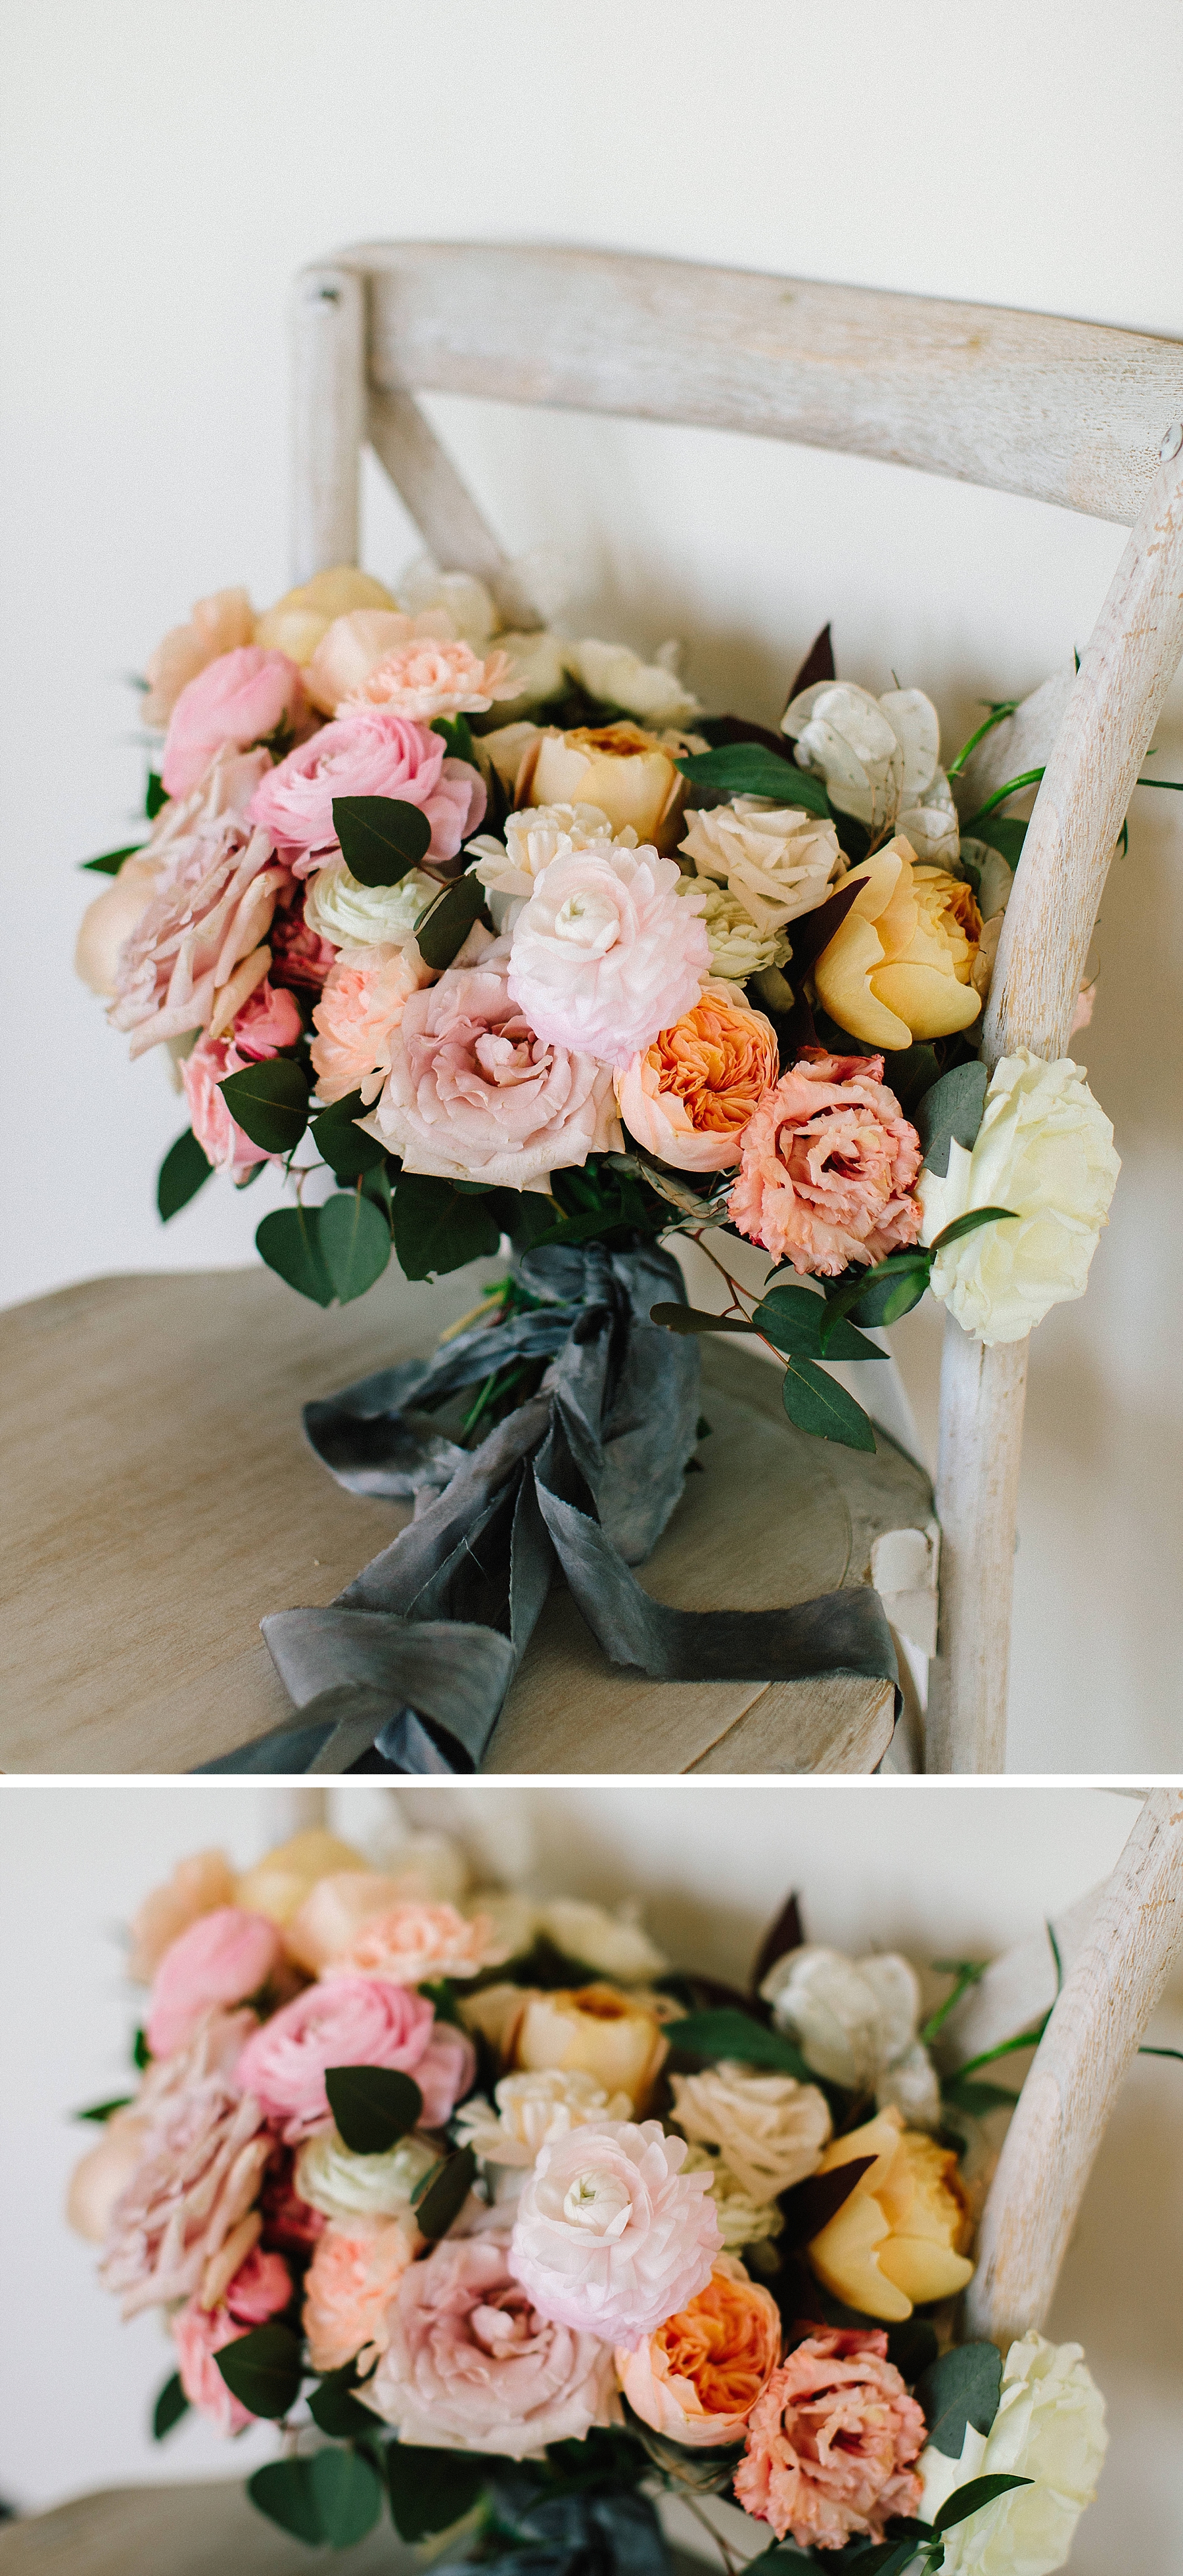 Colorful, artistic, and modern wedding inspiration in Oak Cliff, Texas by Celebrate Dallas.